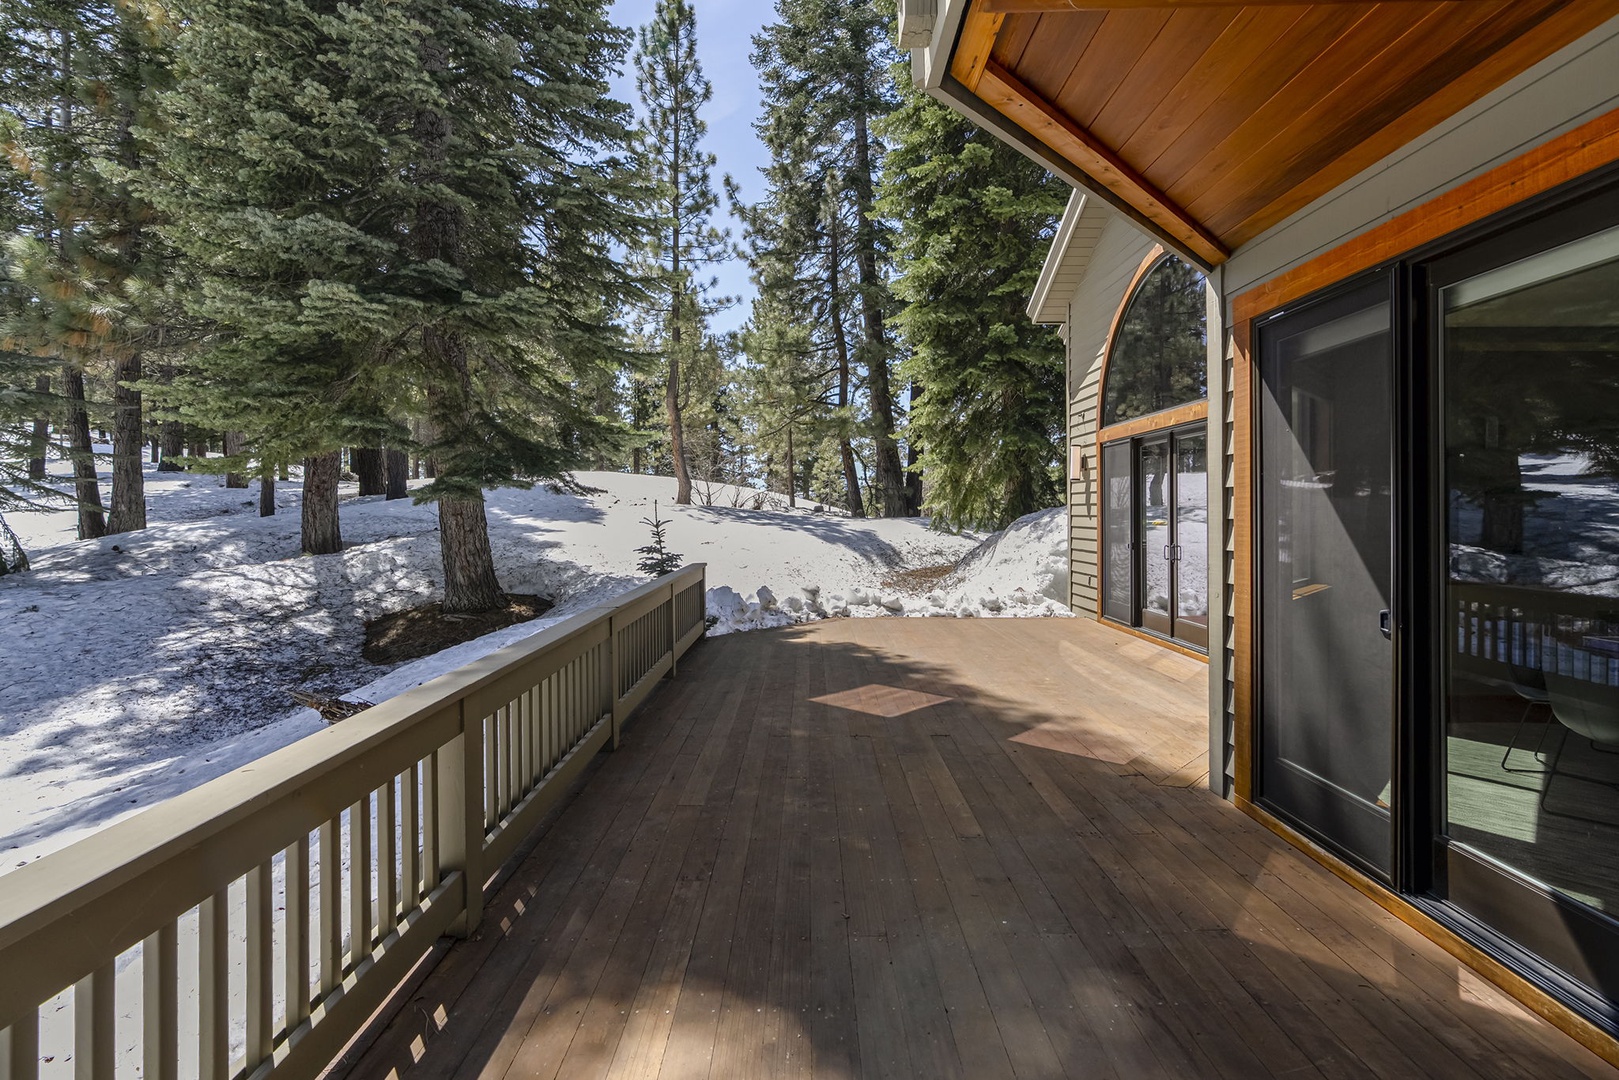 Private patio: Hilltop Manor in Tahoe Donner